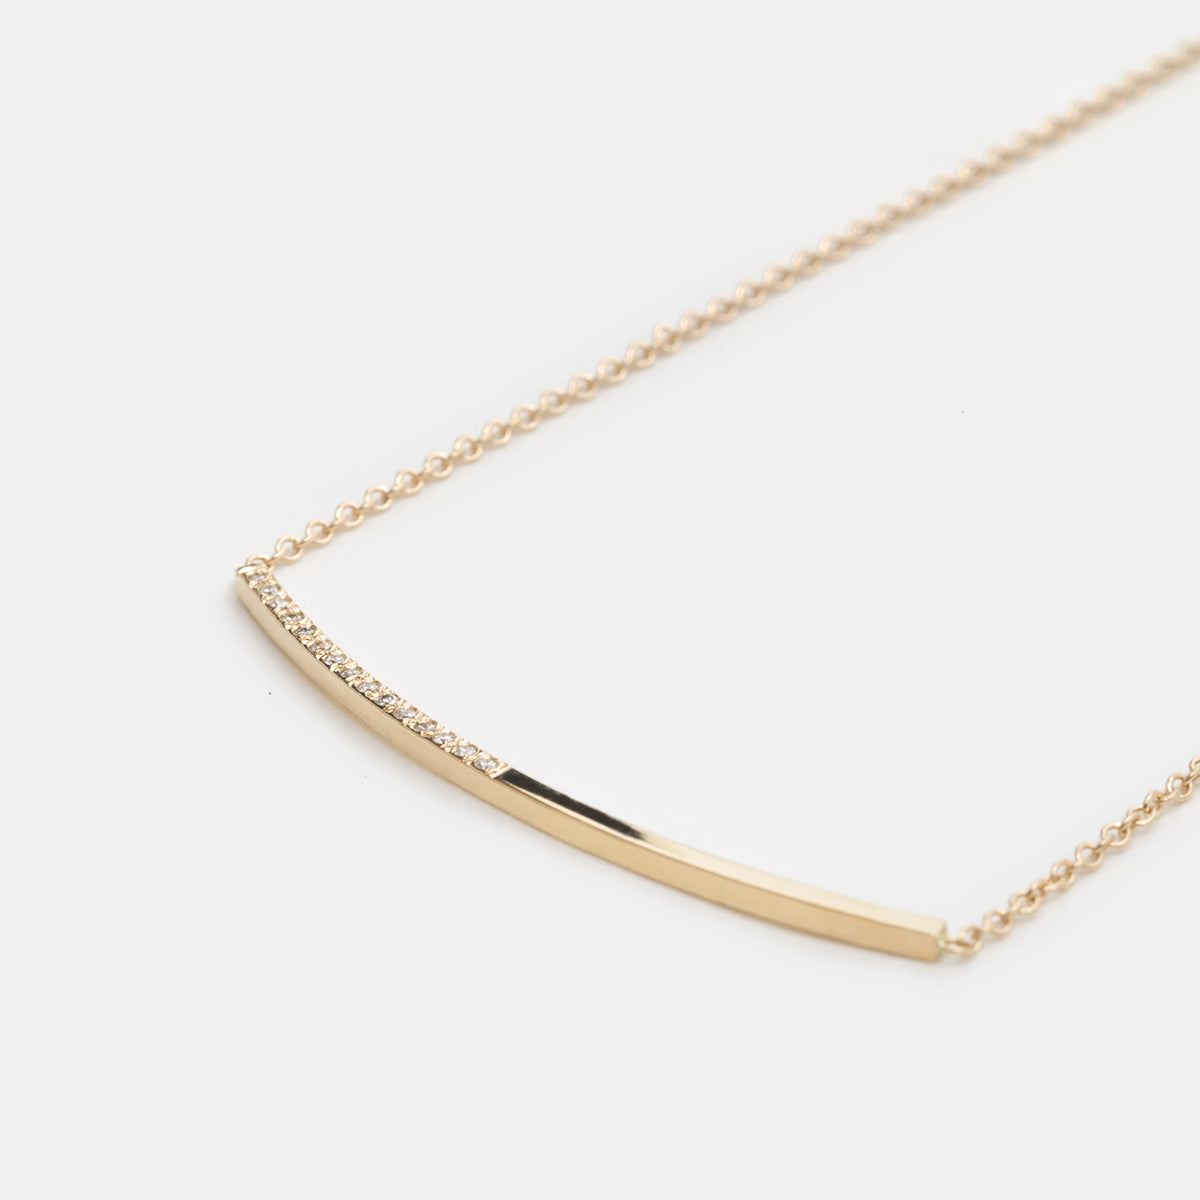 Iva Unusual Choker in 14k Gold set with White Diamonds By SHW Fine Jewelry New York City